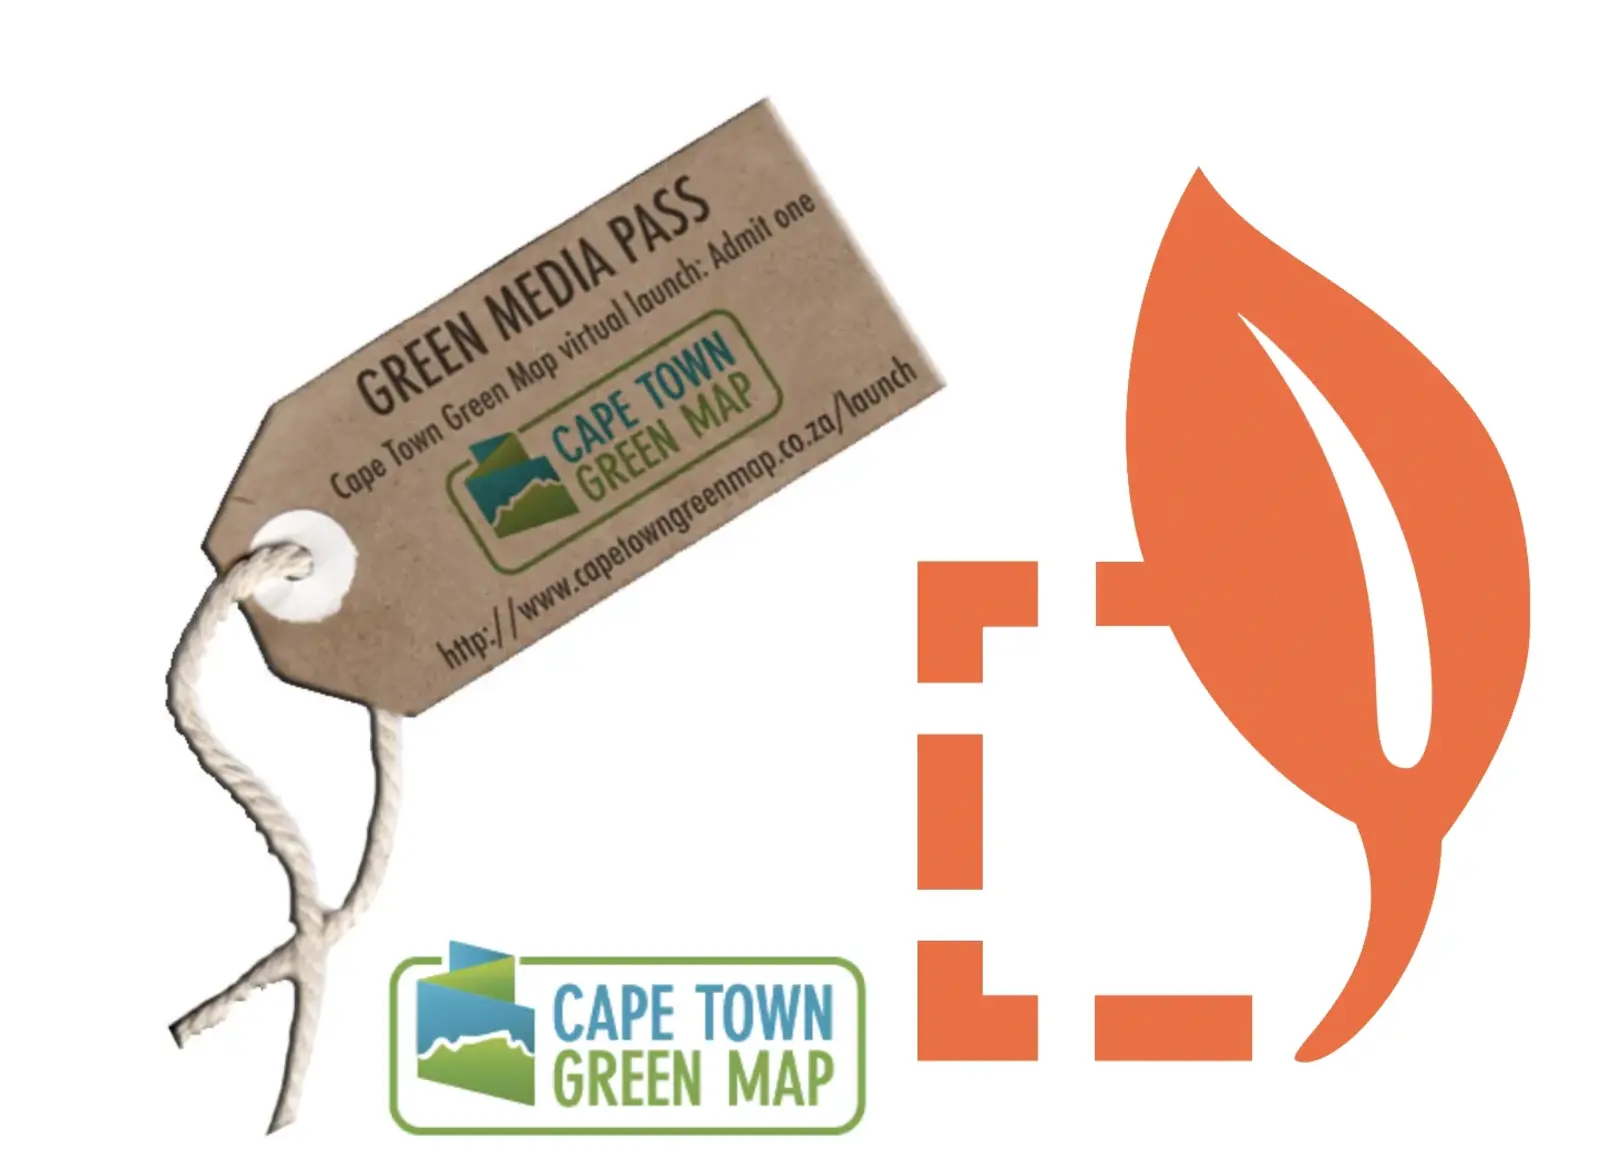 Celebrating 13 years of Green Mapmaking in South Africa